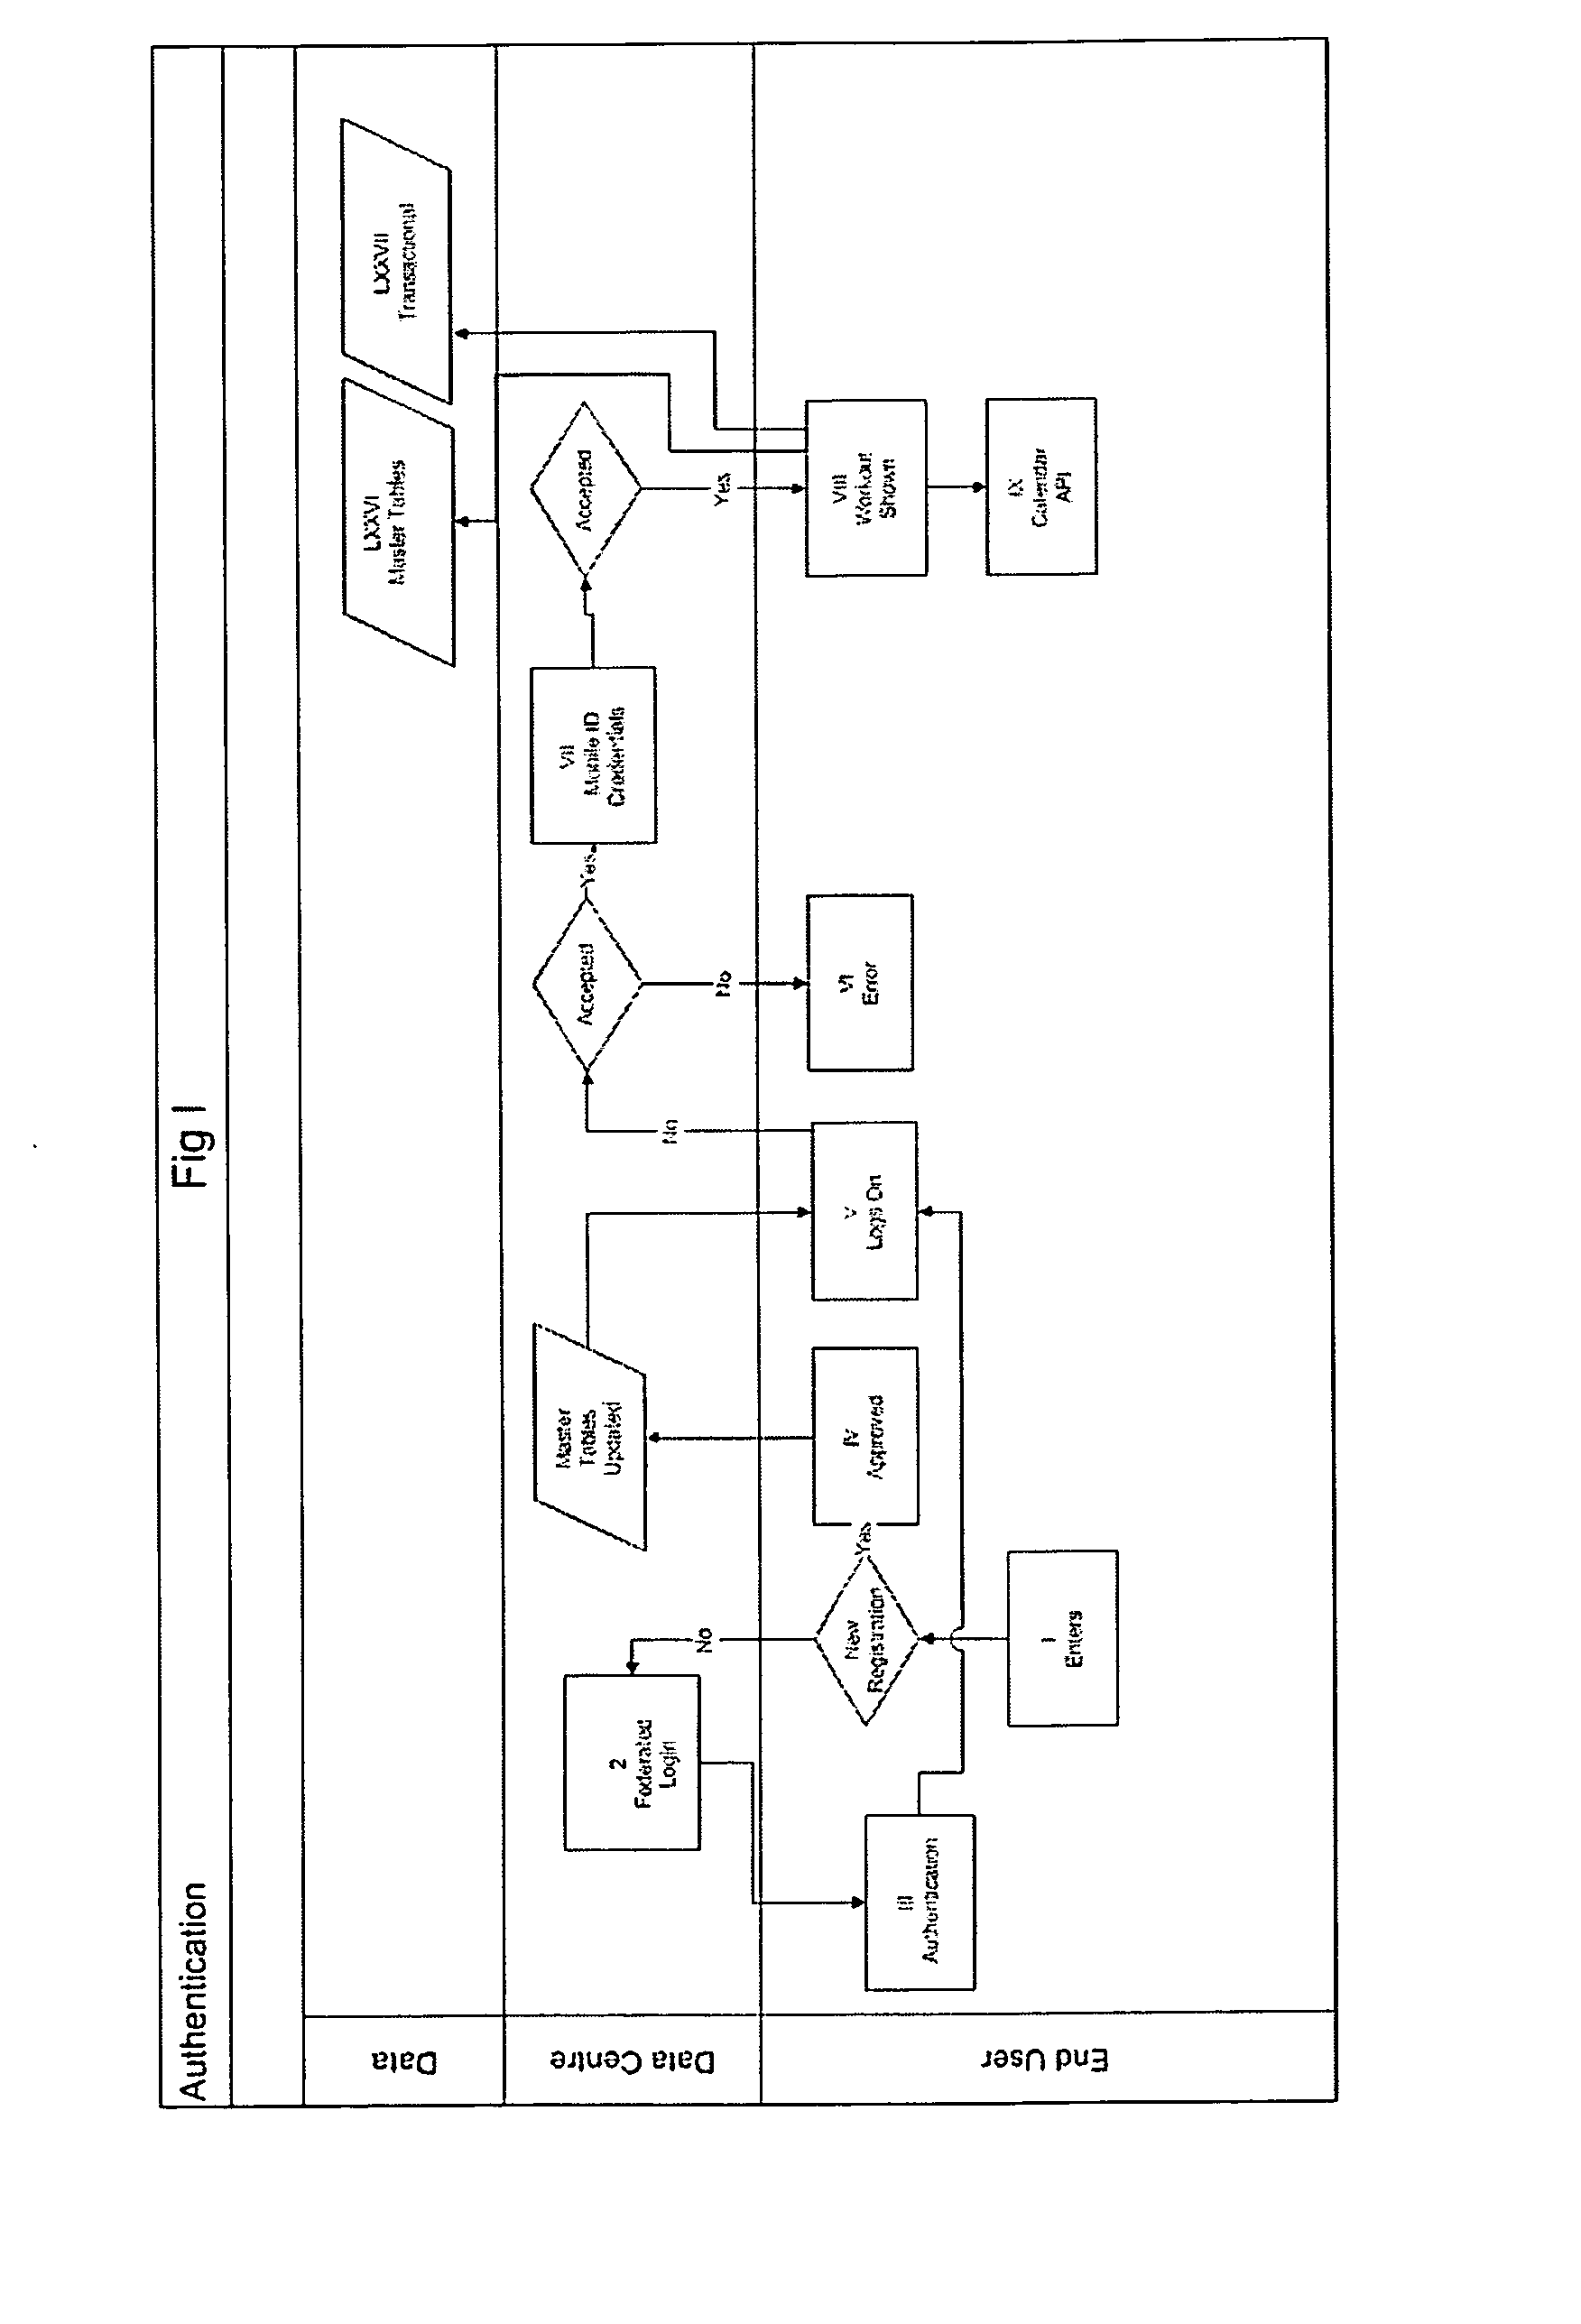 System and method for authentication, usage, monitoring and management within a health care facility